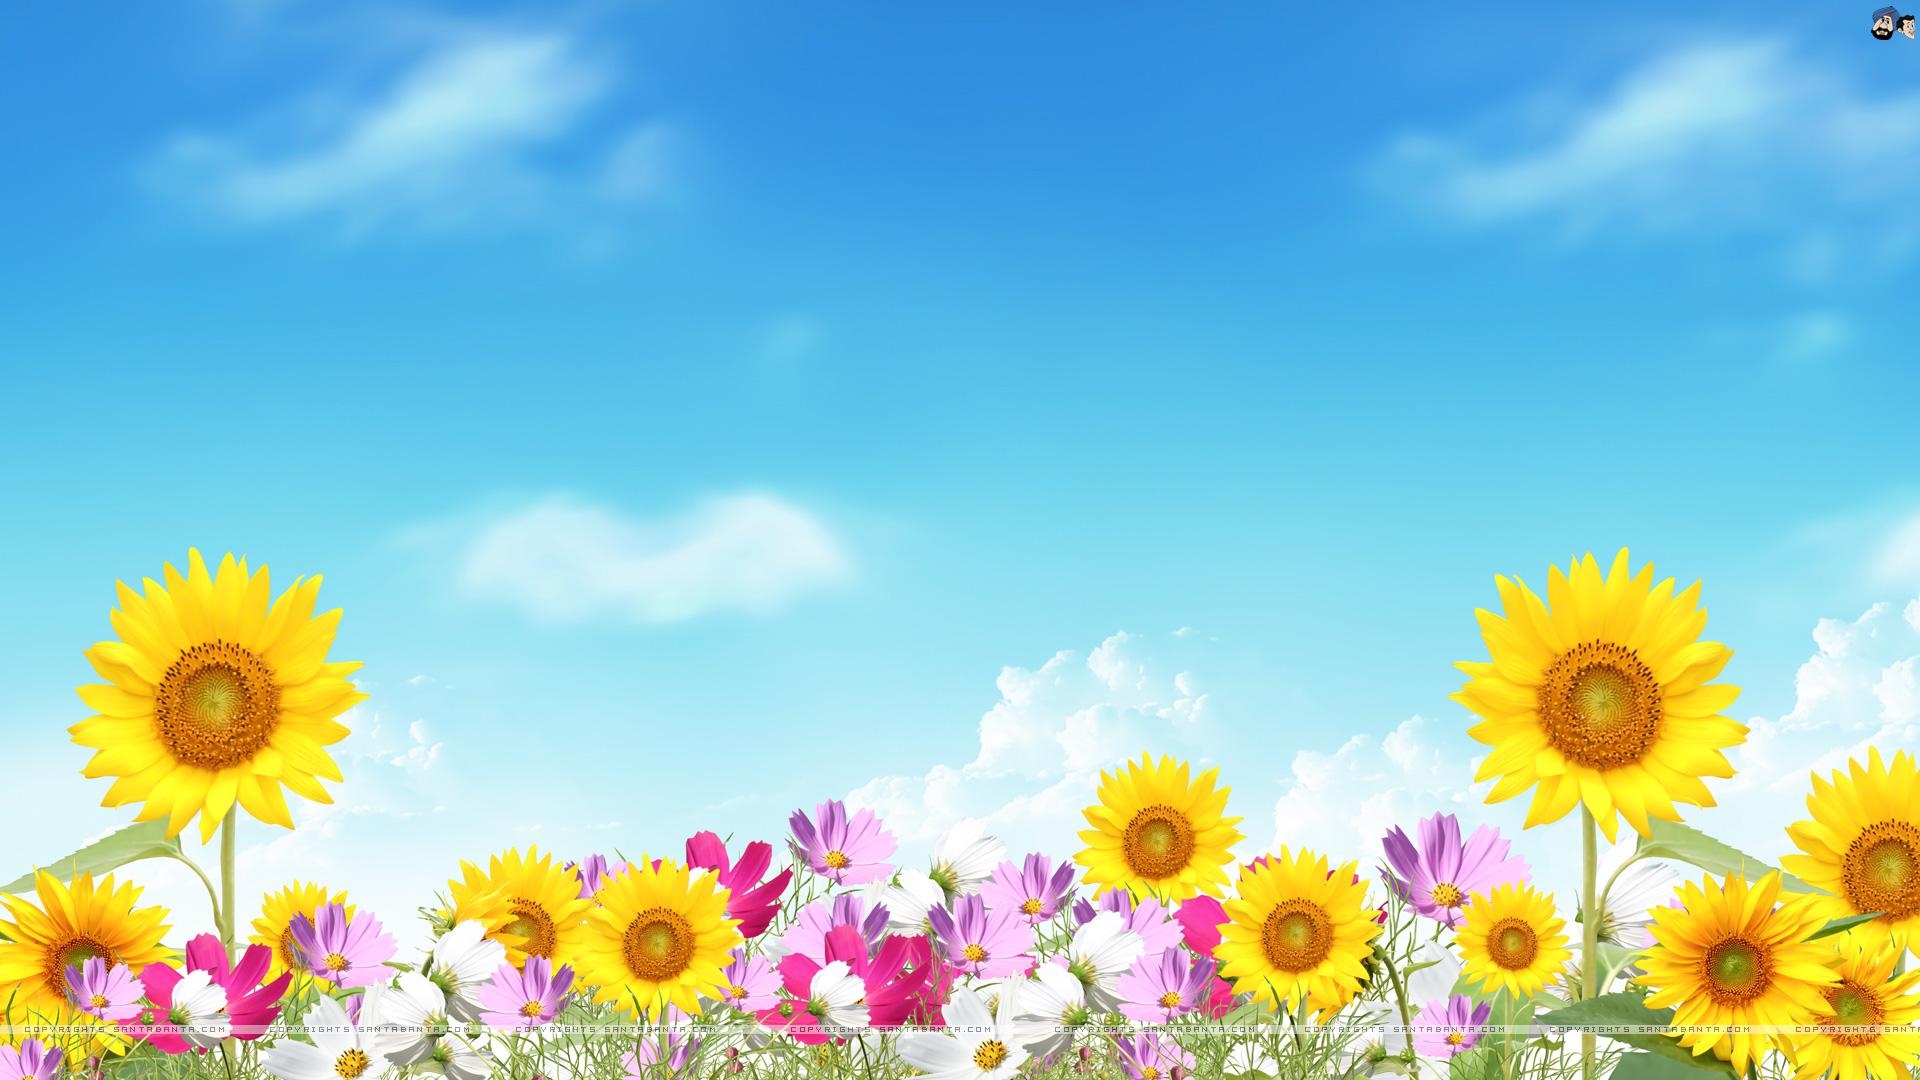 Wallpapers Of Summer Backgrounds Free HD Wallpapers Range